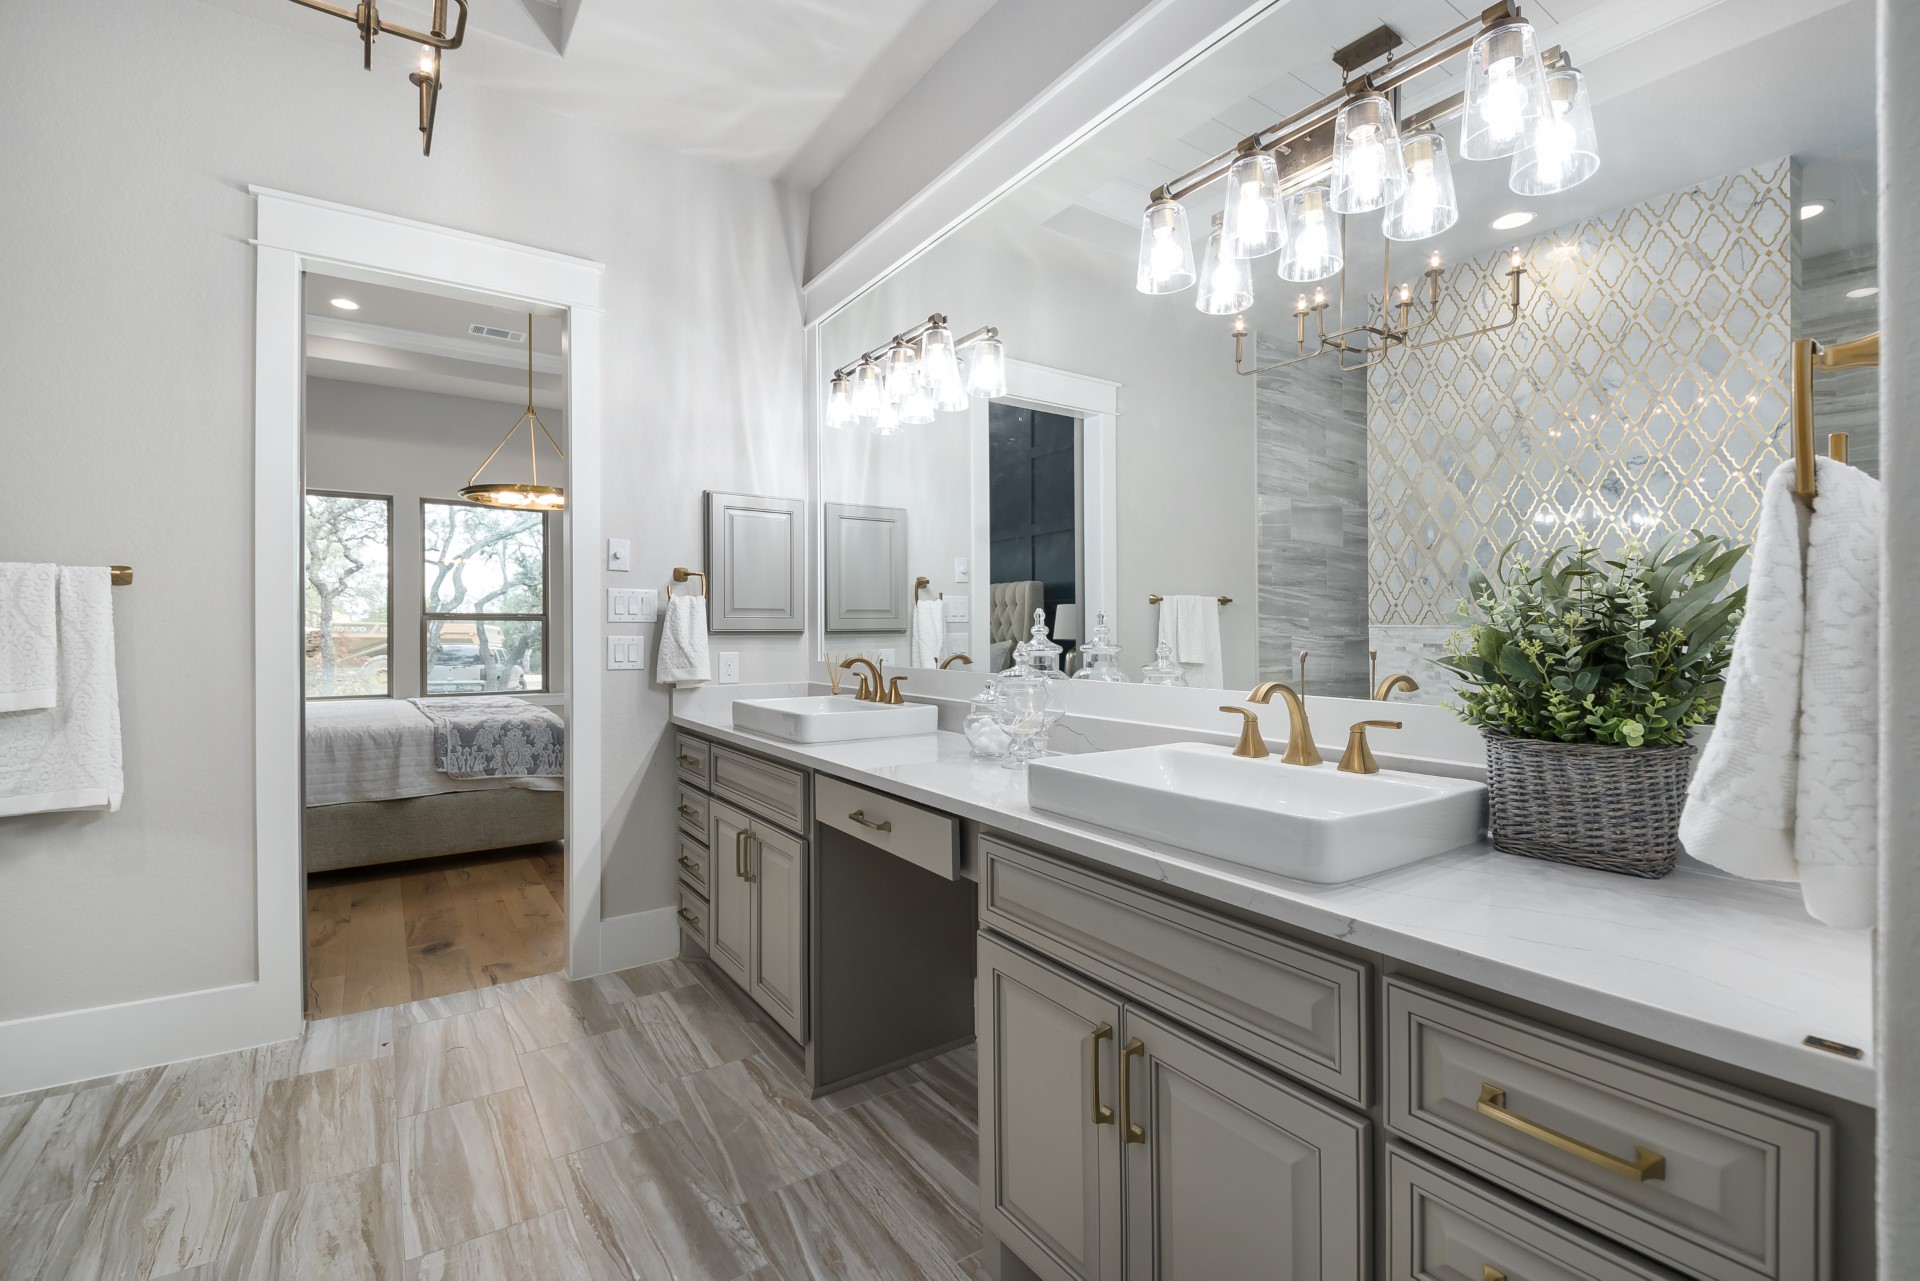 A side view of the master bathroom within the Belle Oaks custom floor plan from JLP Builders